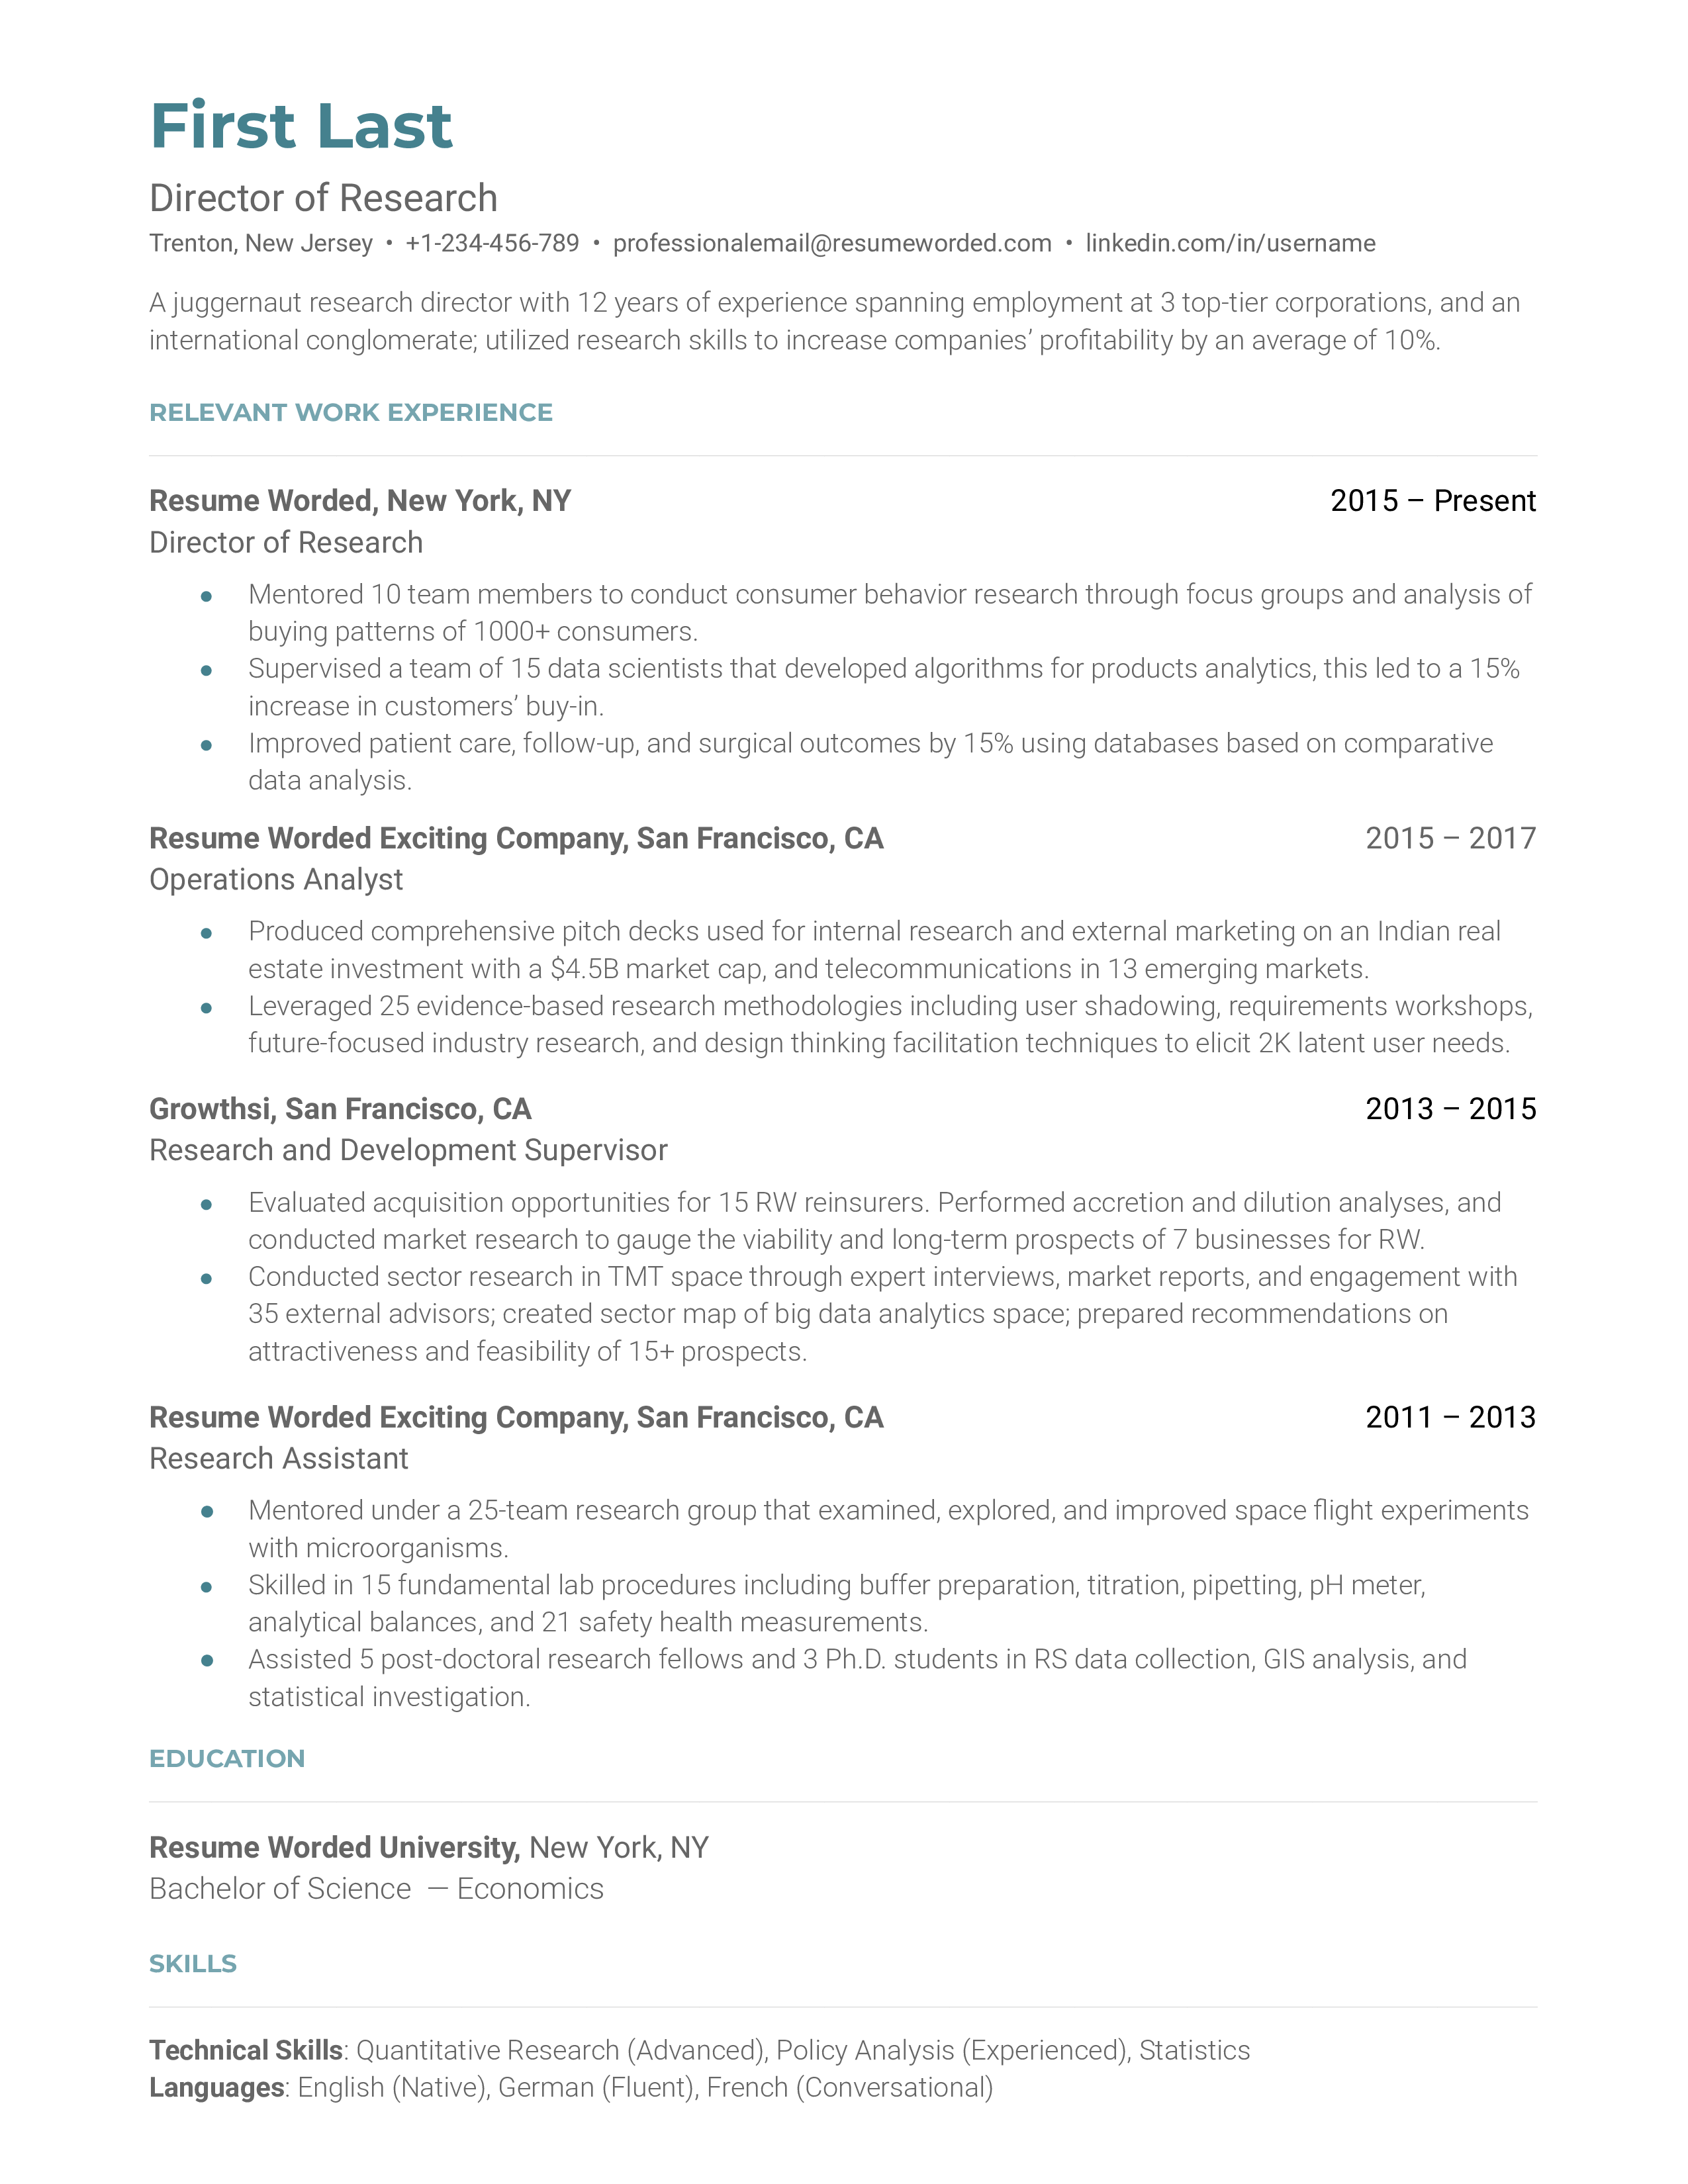 A director of research resume sample that highlights the applicant’s career progression and experience.